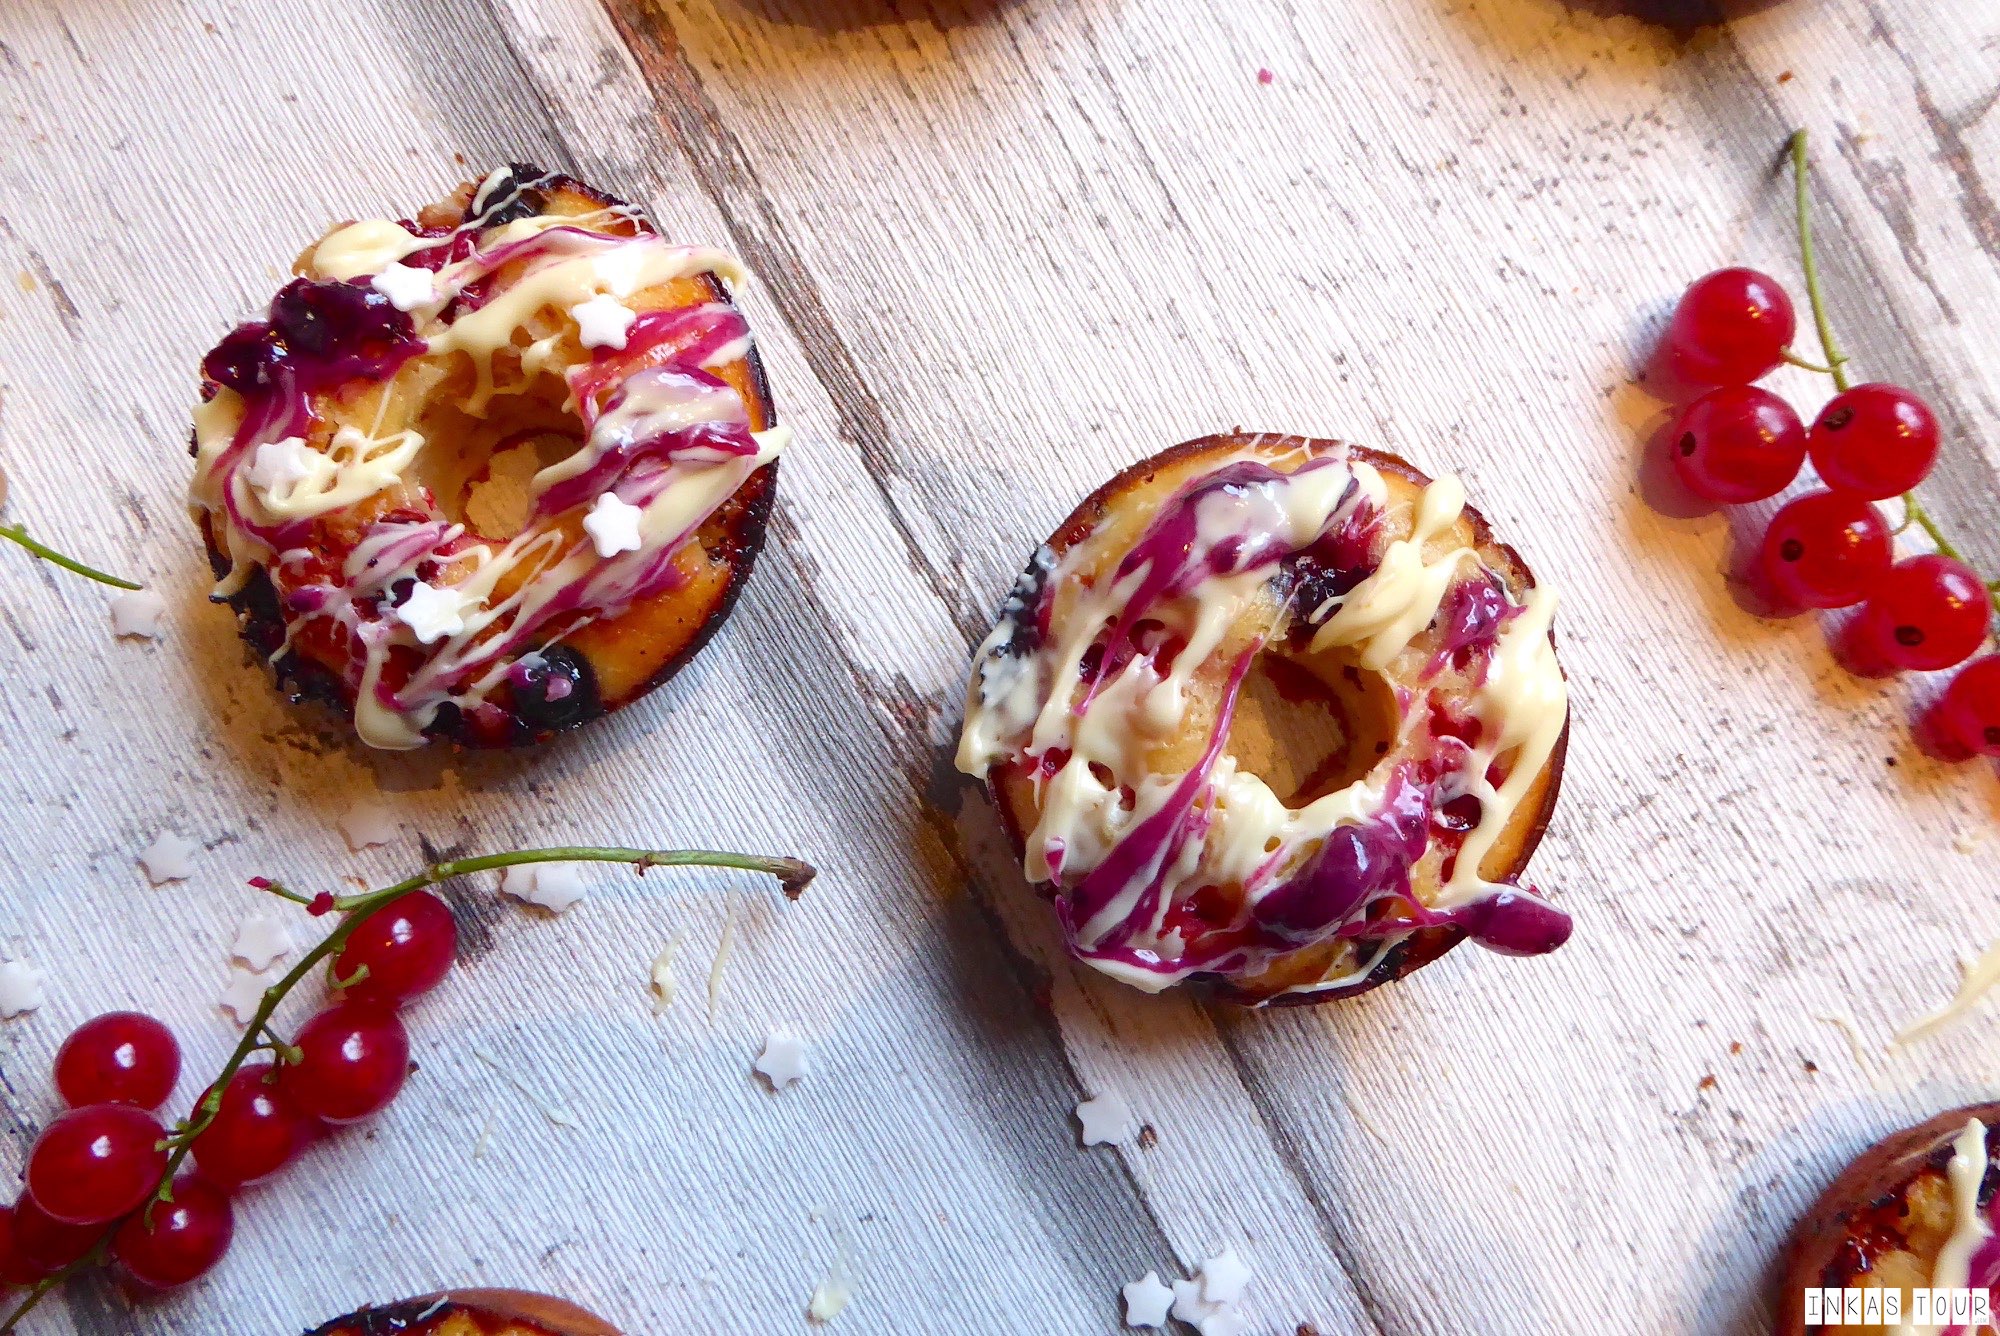 Oven Baked White Chocolate Cassis Donuts